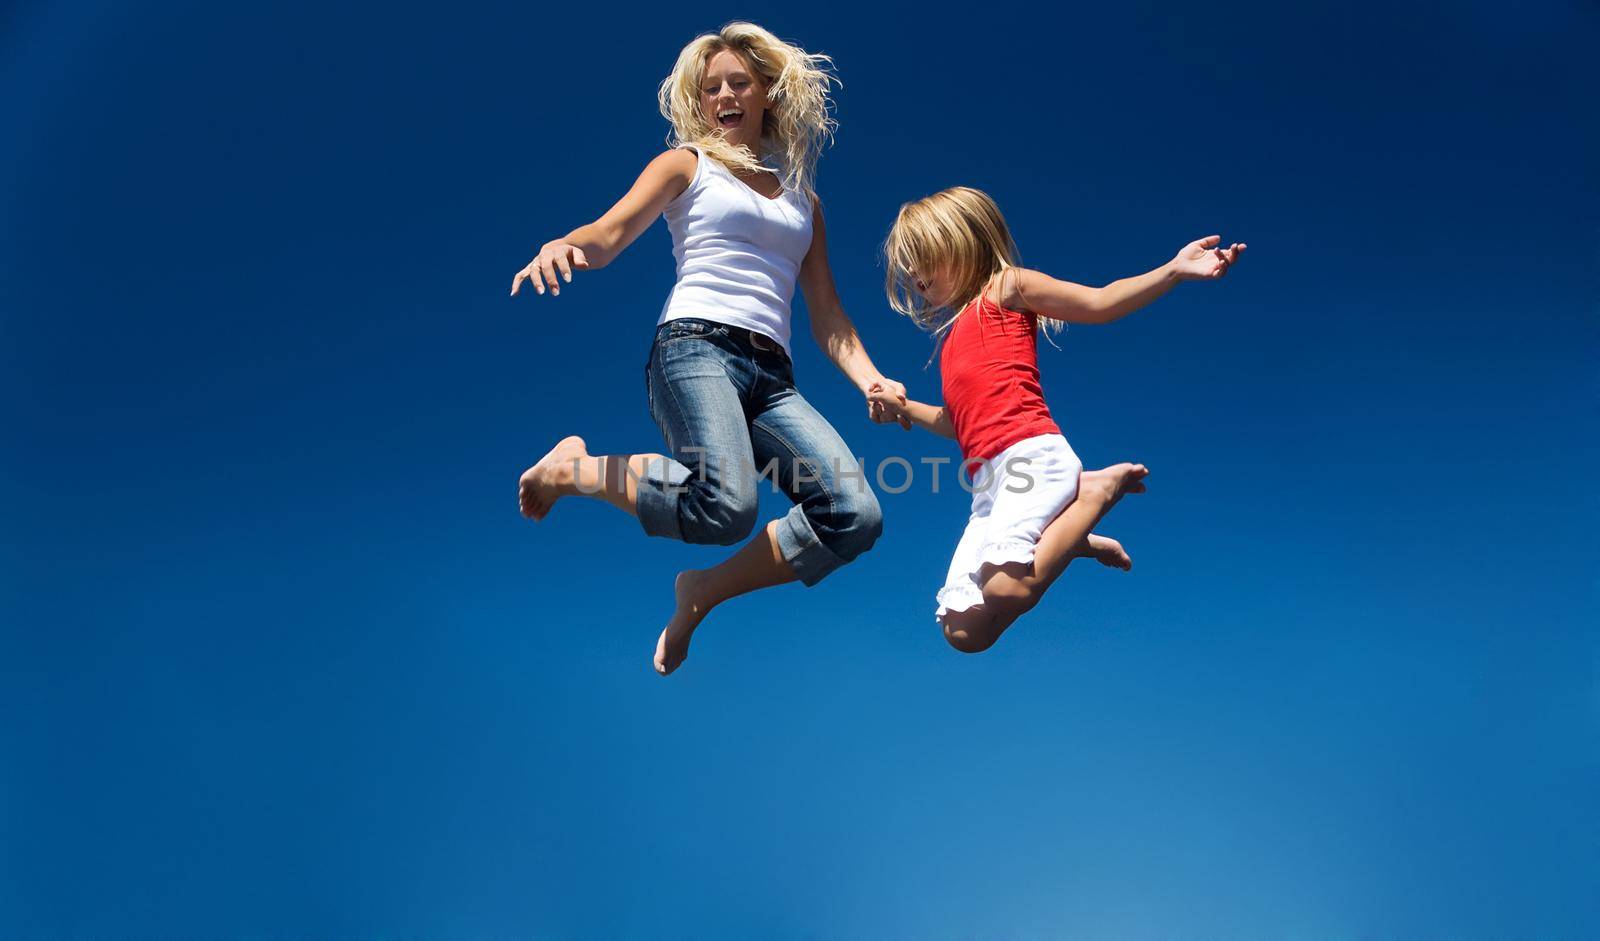 A mother and her daughter jumping high having lots of fun